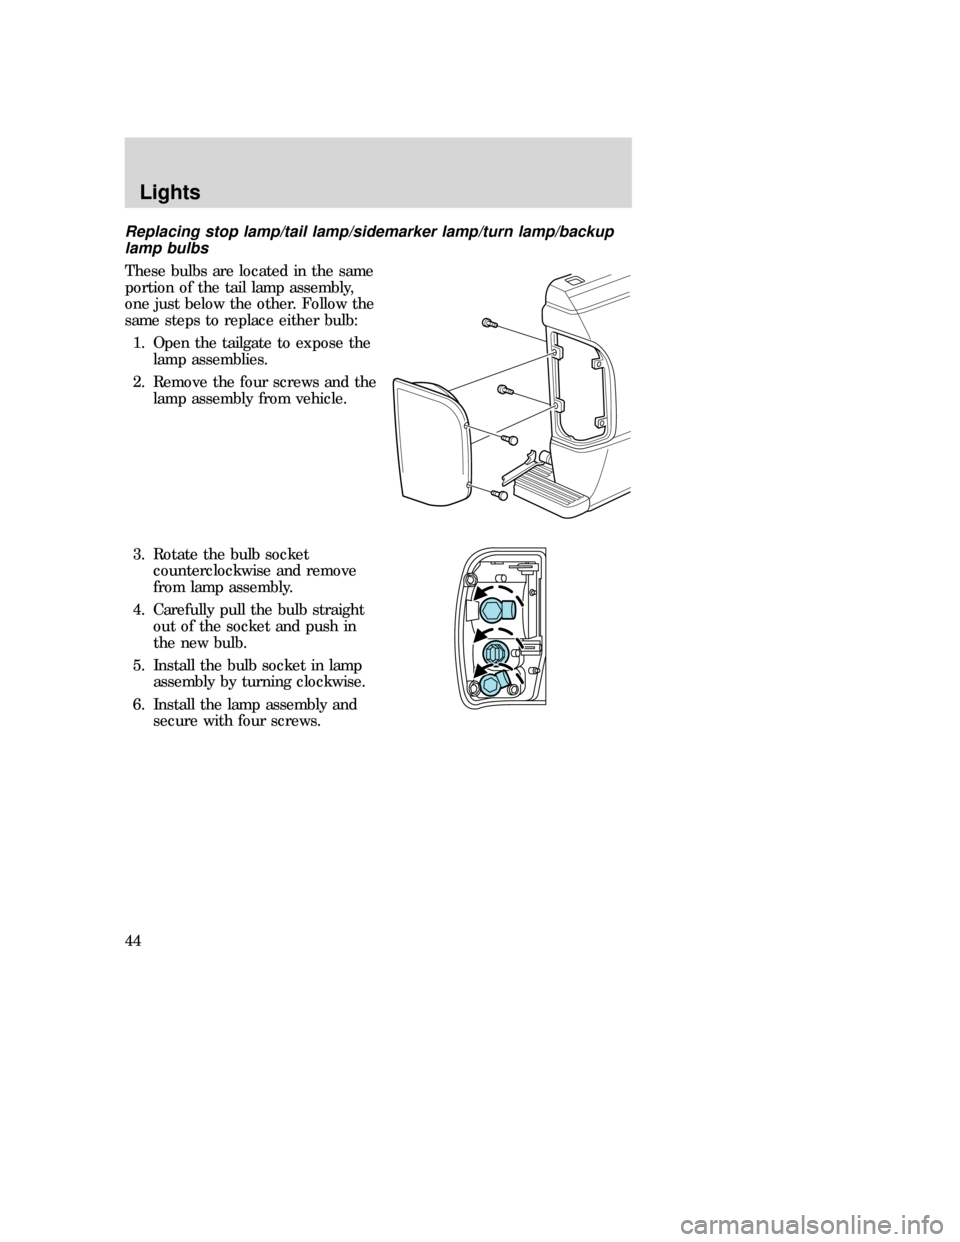 MAZDA MODEL B-SERIES 2006   (in English) Service Manual Replacing stop lamp/tail lamp/sidemarker lamp/turn lamp/backup
lamp bulbs
These bulbs are located in the same
portion of the tail lamp assembly,
one just below the other. Follow the
same steps to repl